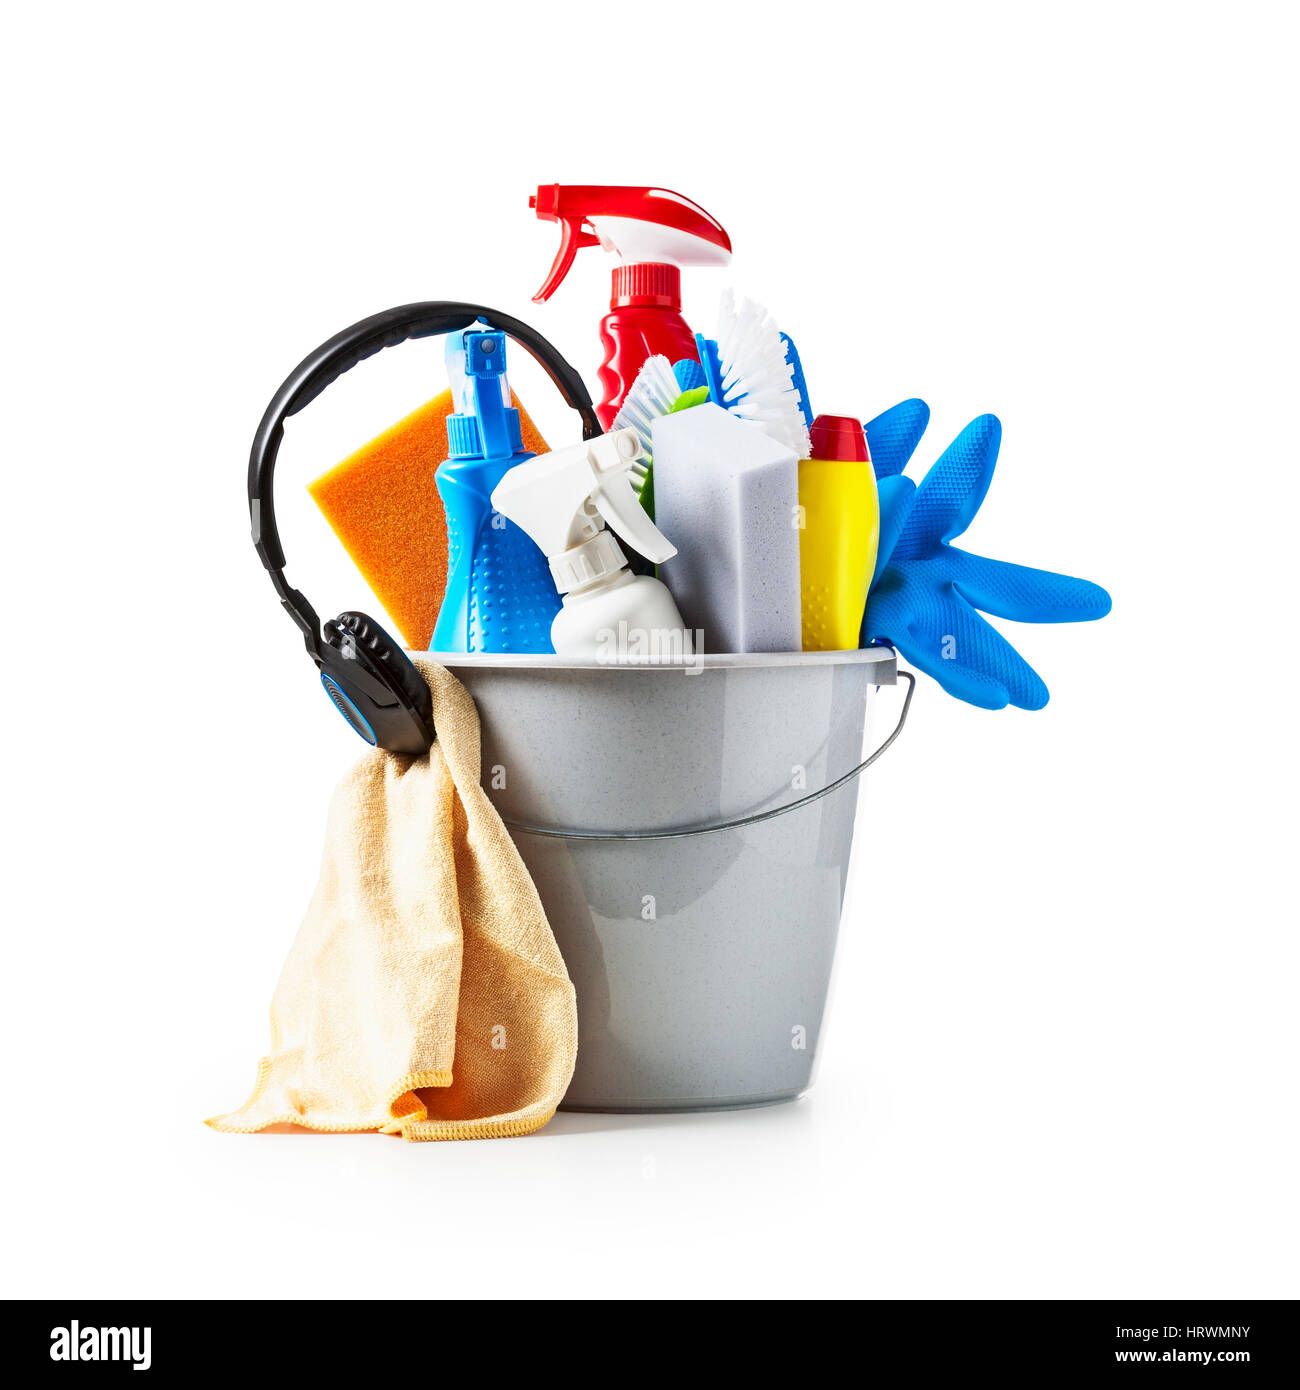 Bucket with cleaning supplies and music headphone isolated on white background. Single object with clipping path Stock Photo